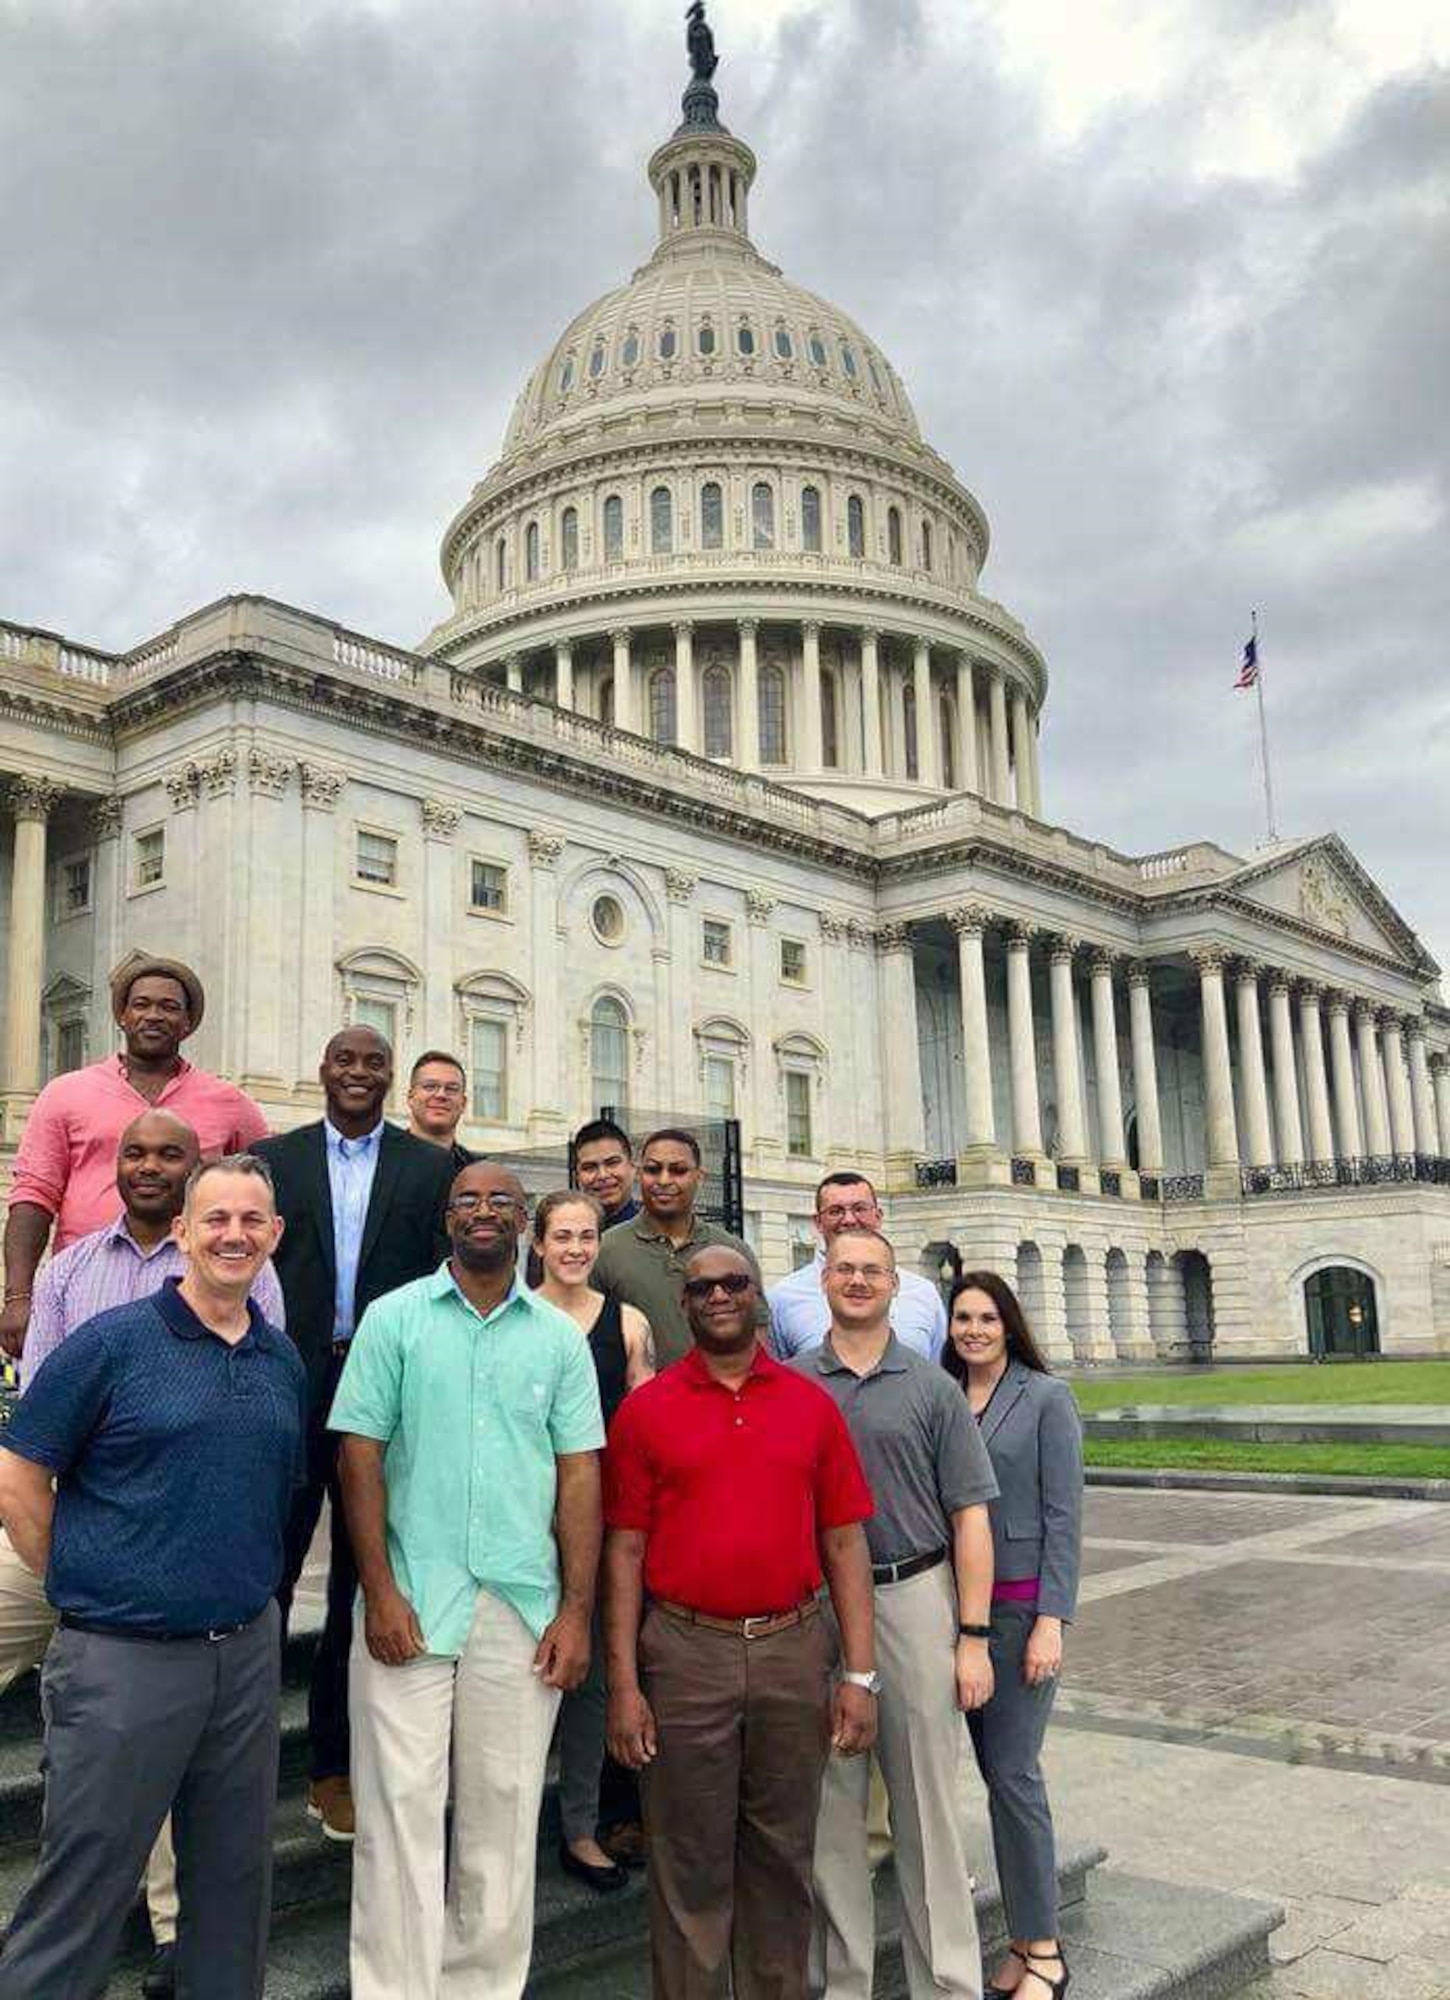 Members of the 6th and 927th Maintenance Squadrons from MacDill Air Force Base, Fla., take a group photo in front of the Capitol Building in Washington D.C., Sept. 17, 2018.